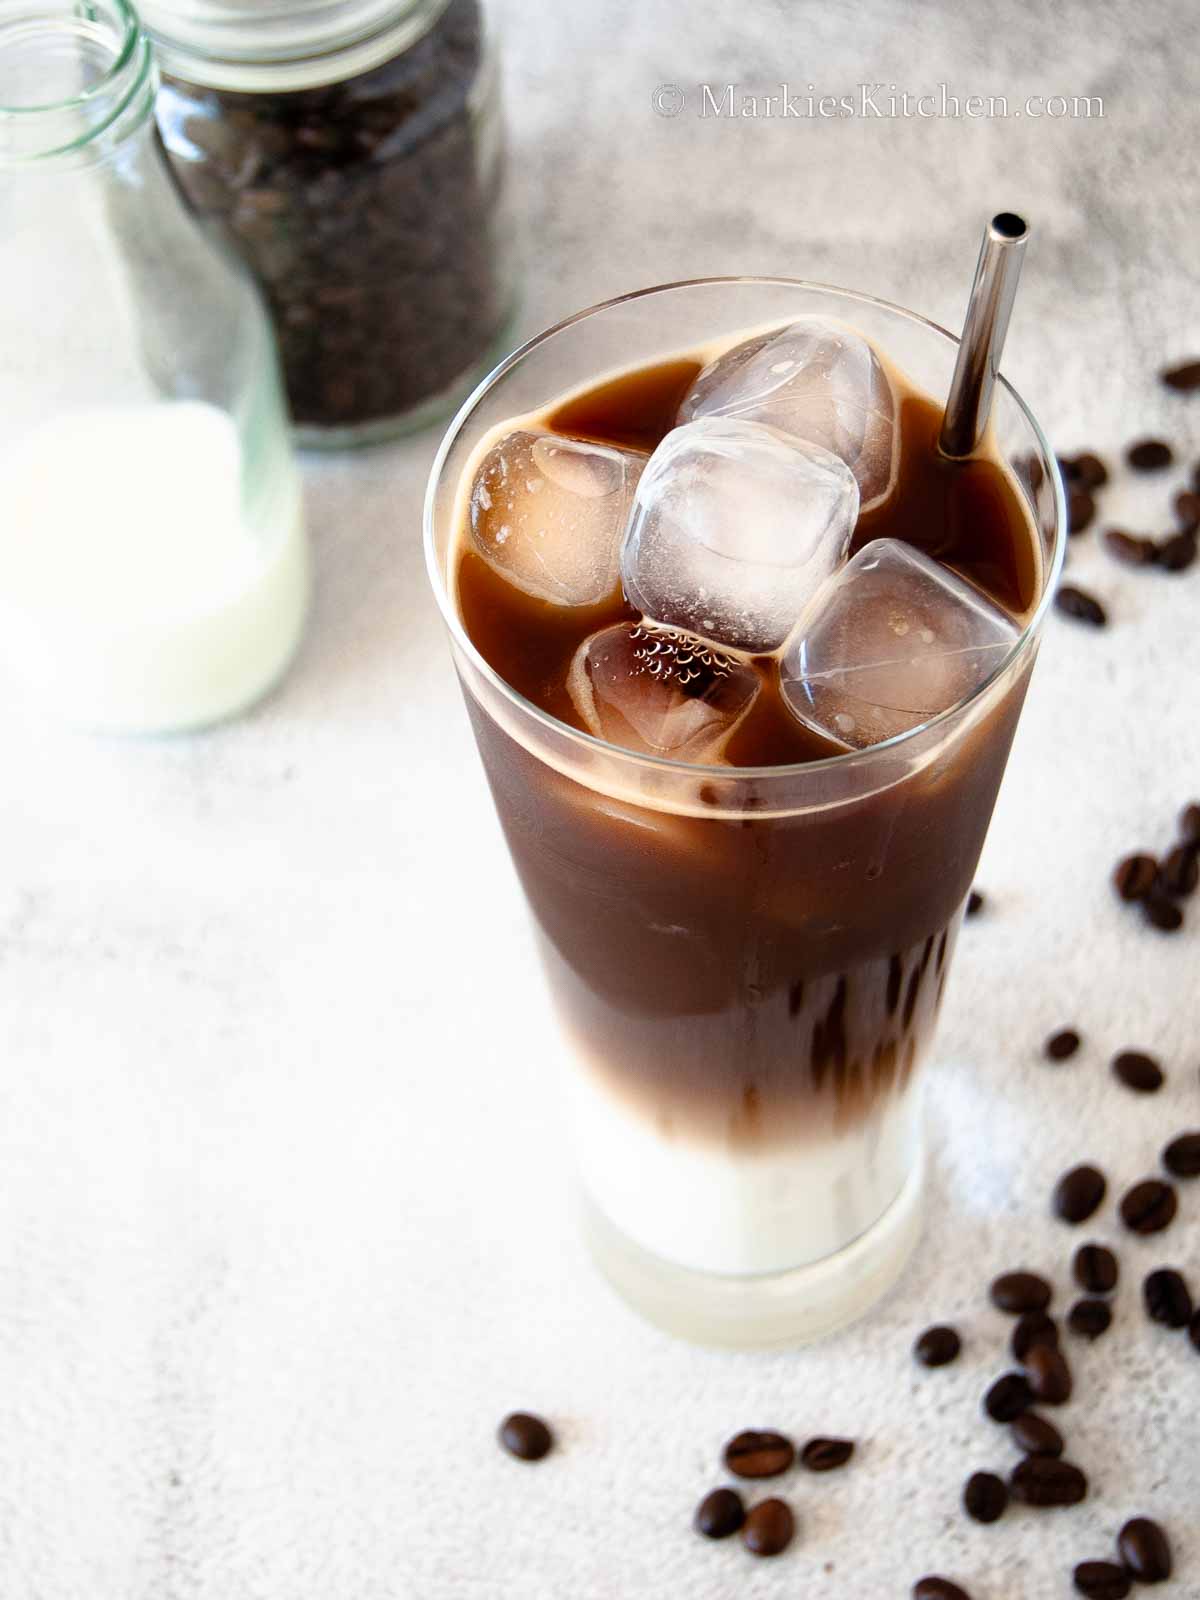 A photo of a glass with iced coffee with milk, a jar with milk and a jar of coffee beans, next to some spilt coffee beans on the side.